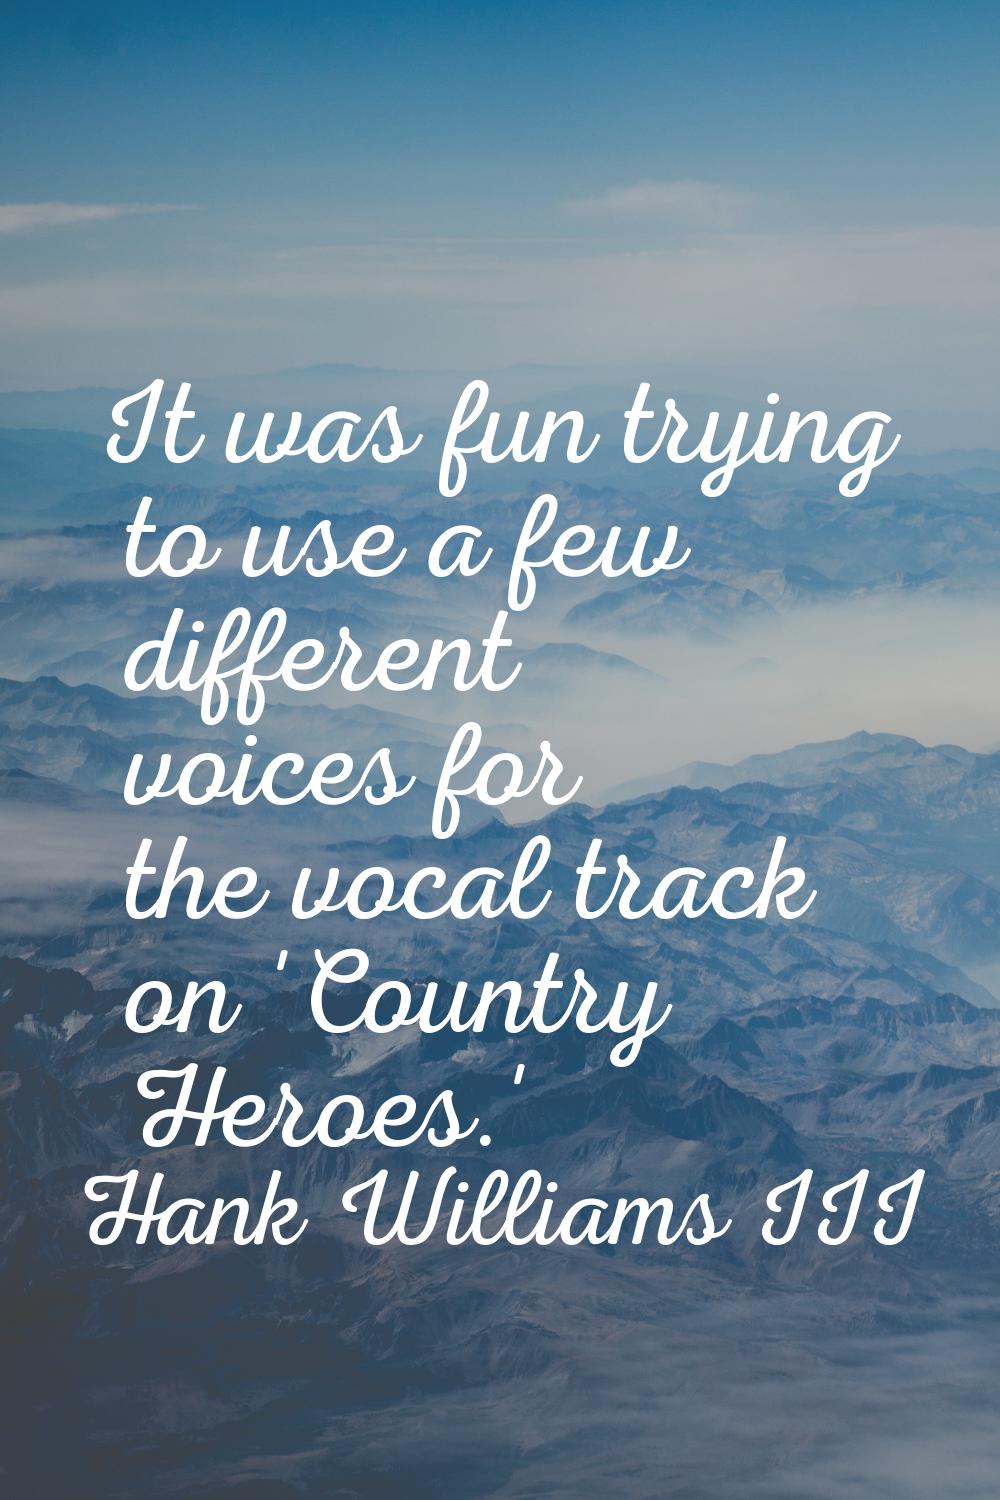 It was fun trying to use a few different voices for the vocal track on 'Country Heroes.'